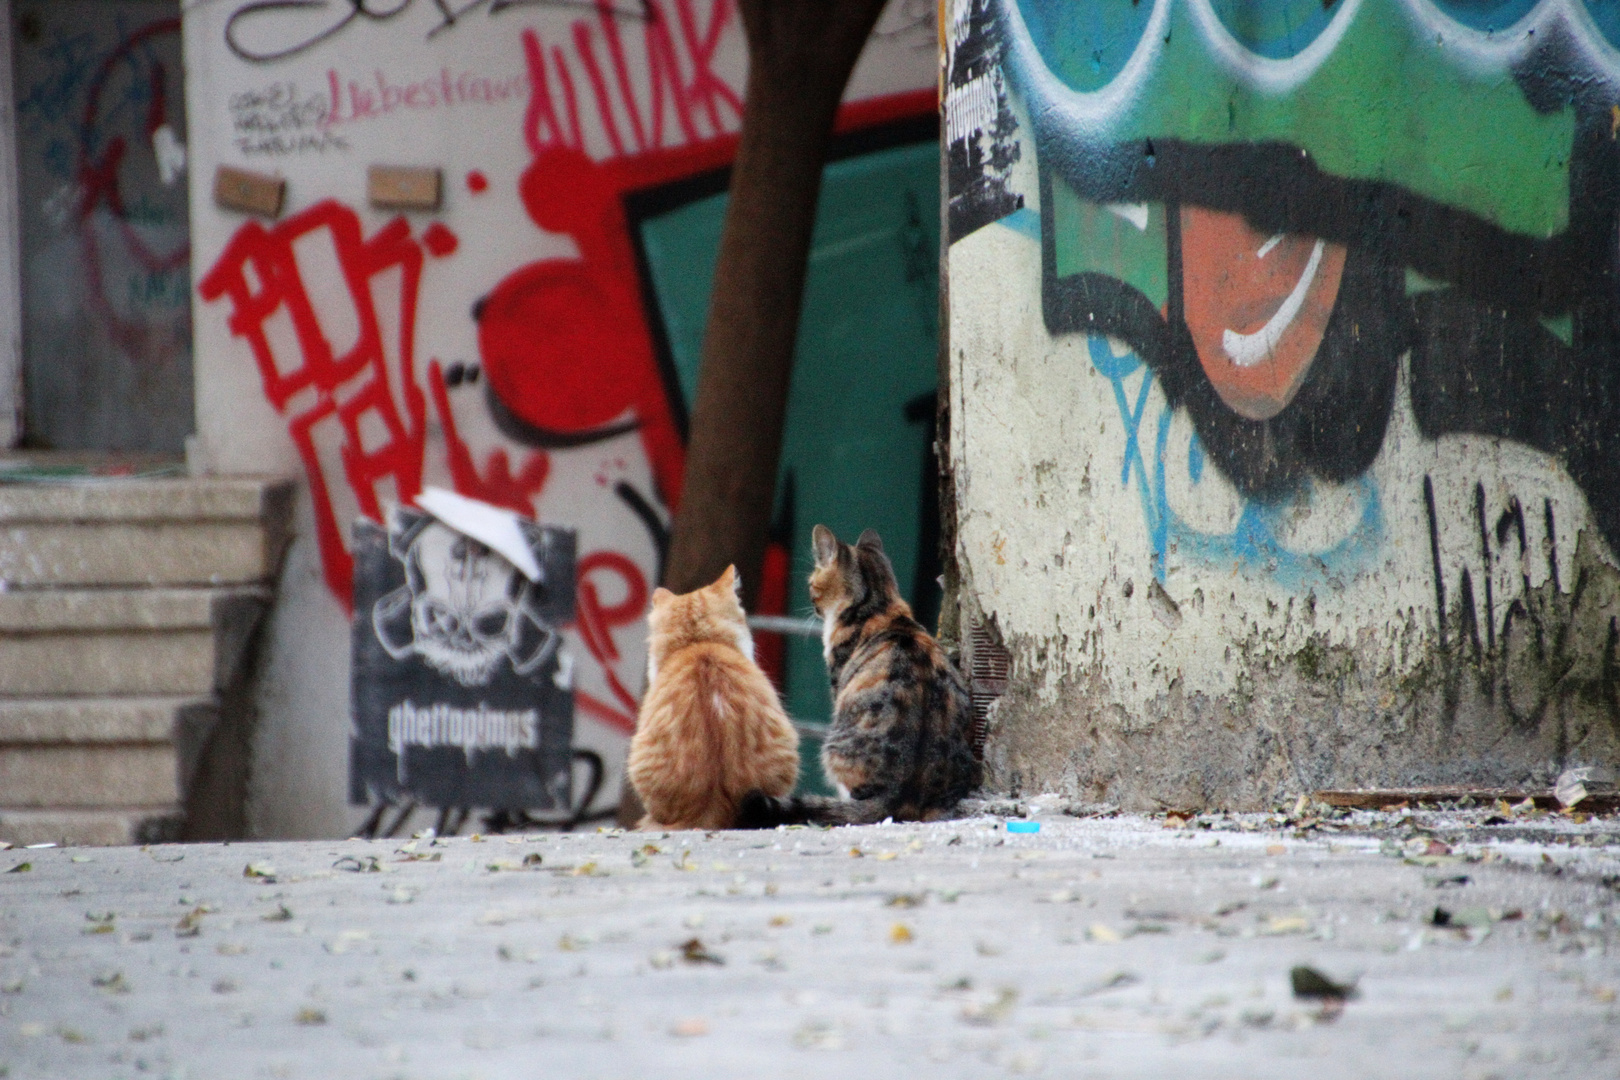 You know the plan? Streetcats of Istanbul